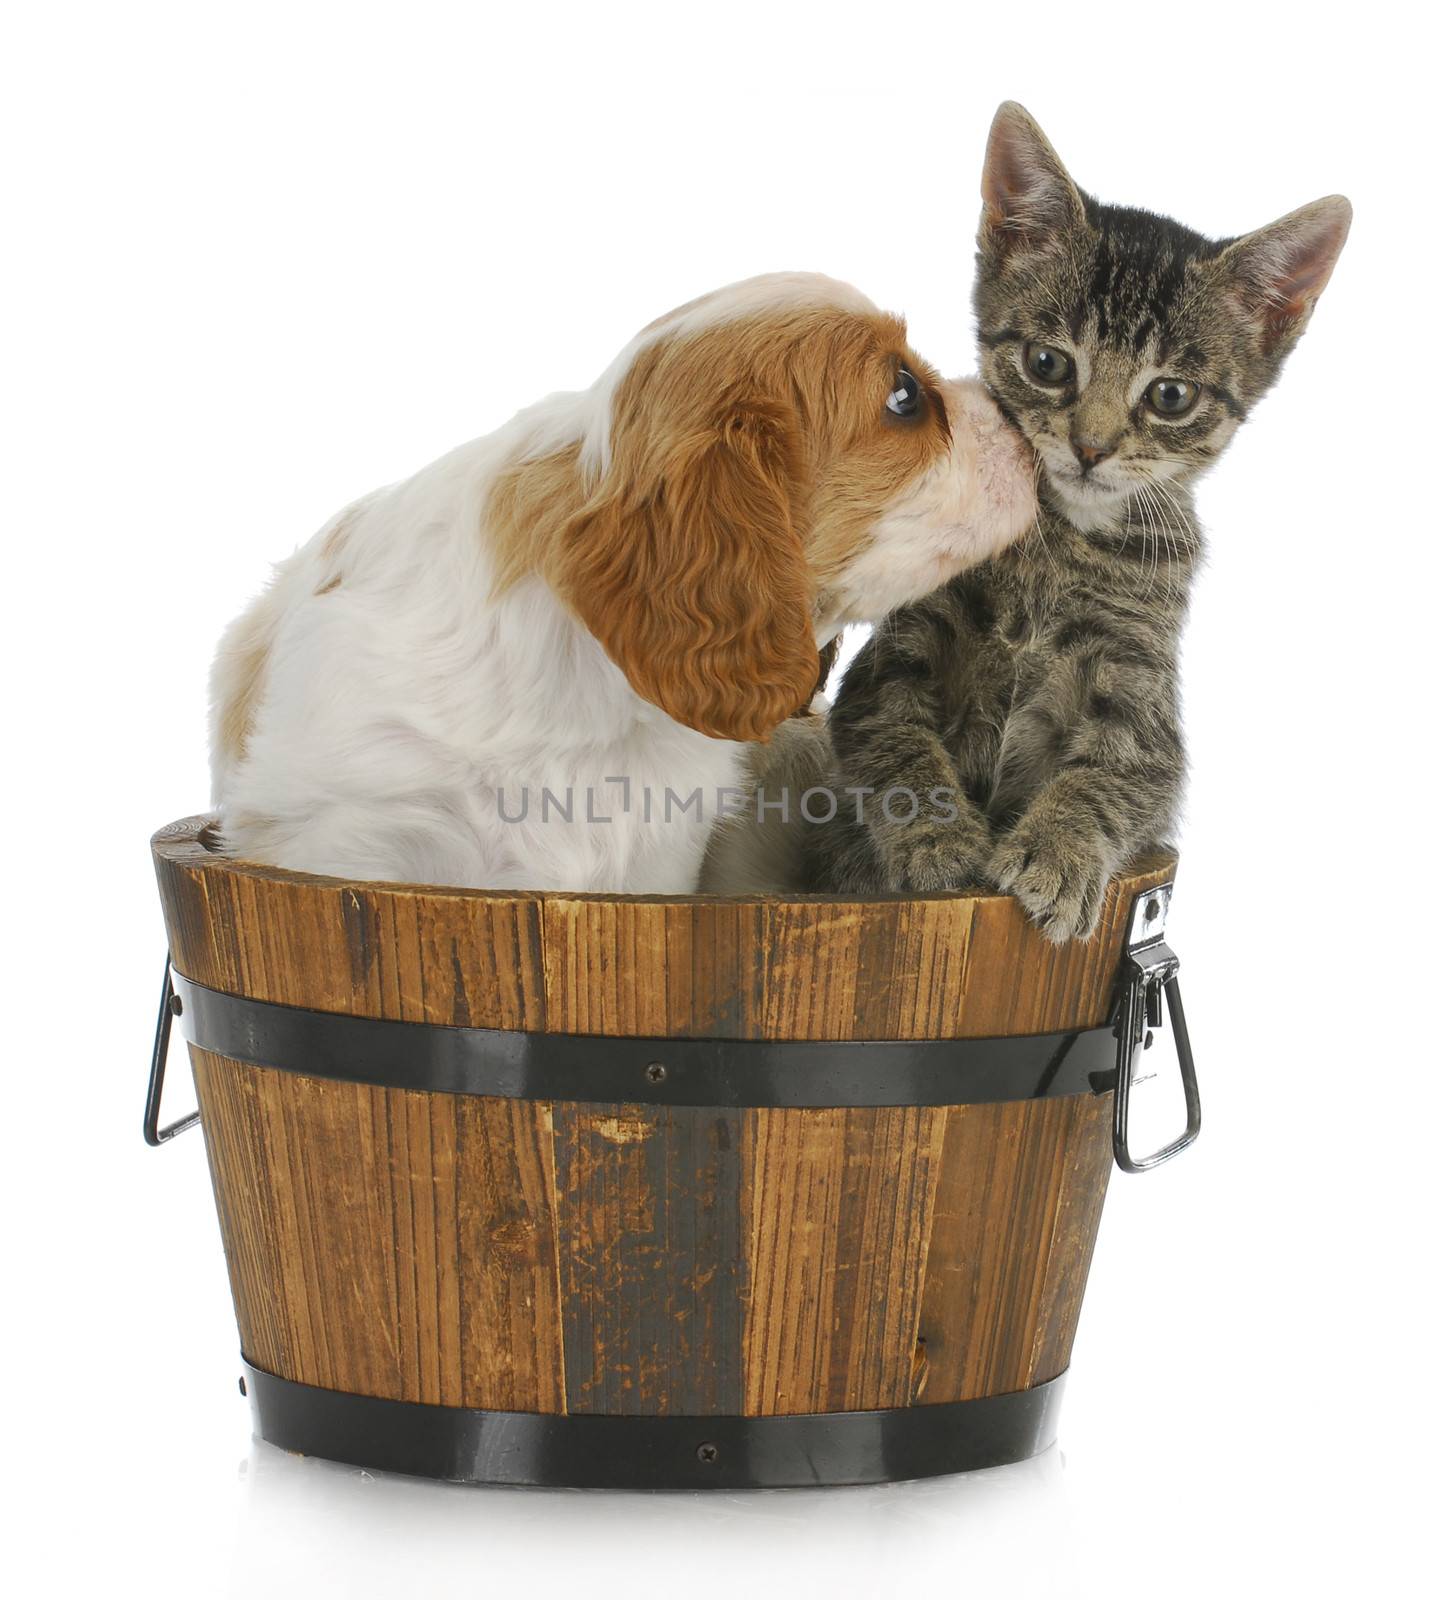 cute puppy and kitten - cavalier king charles spaniel puppy kissing grey short haired kitten on white background